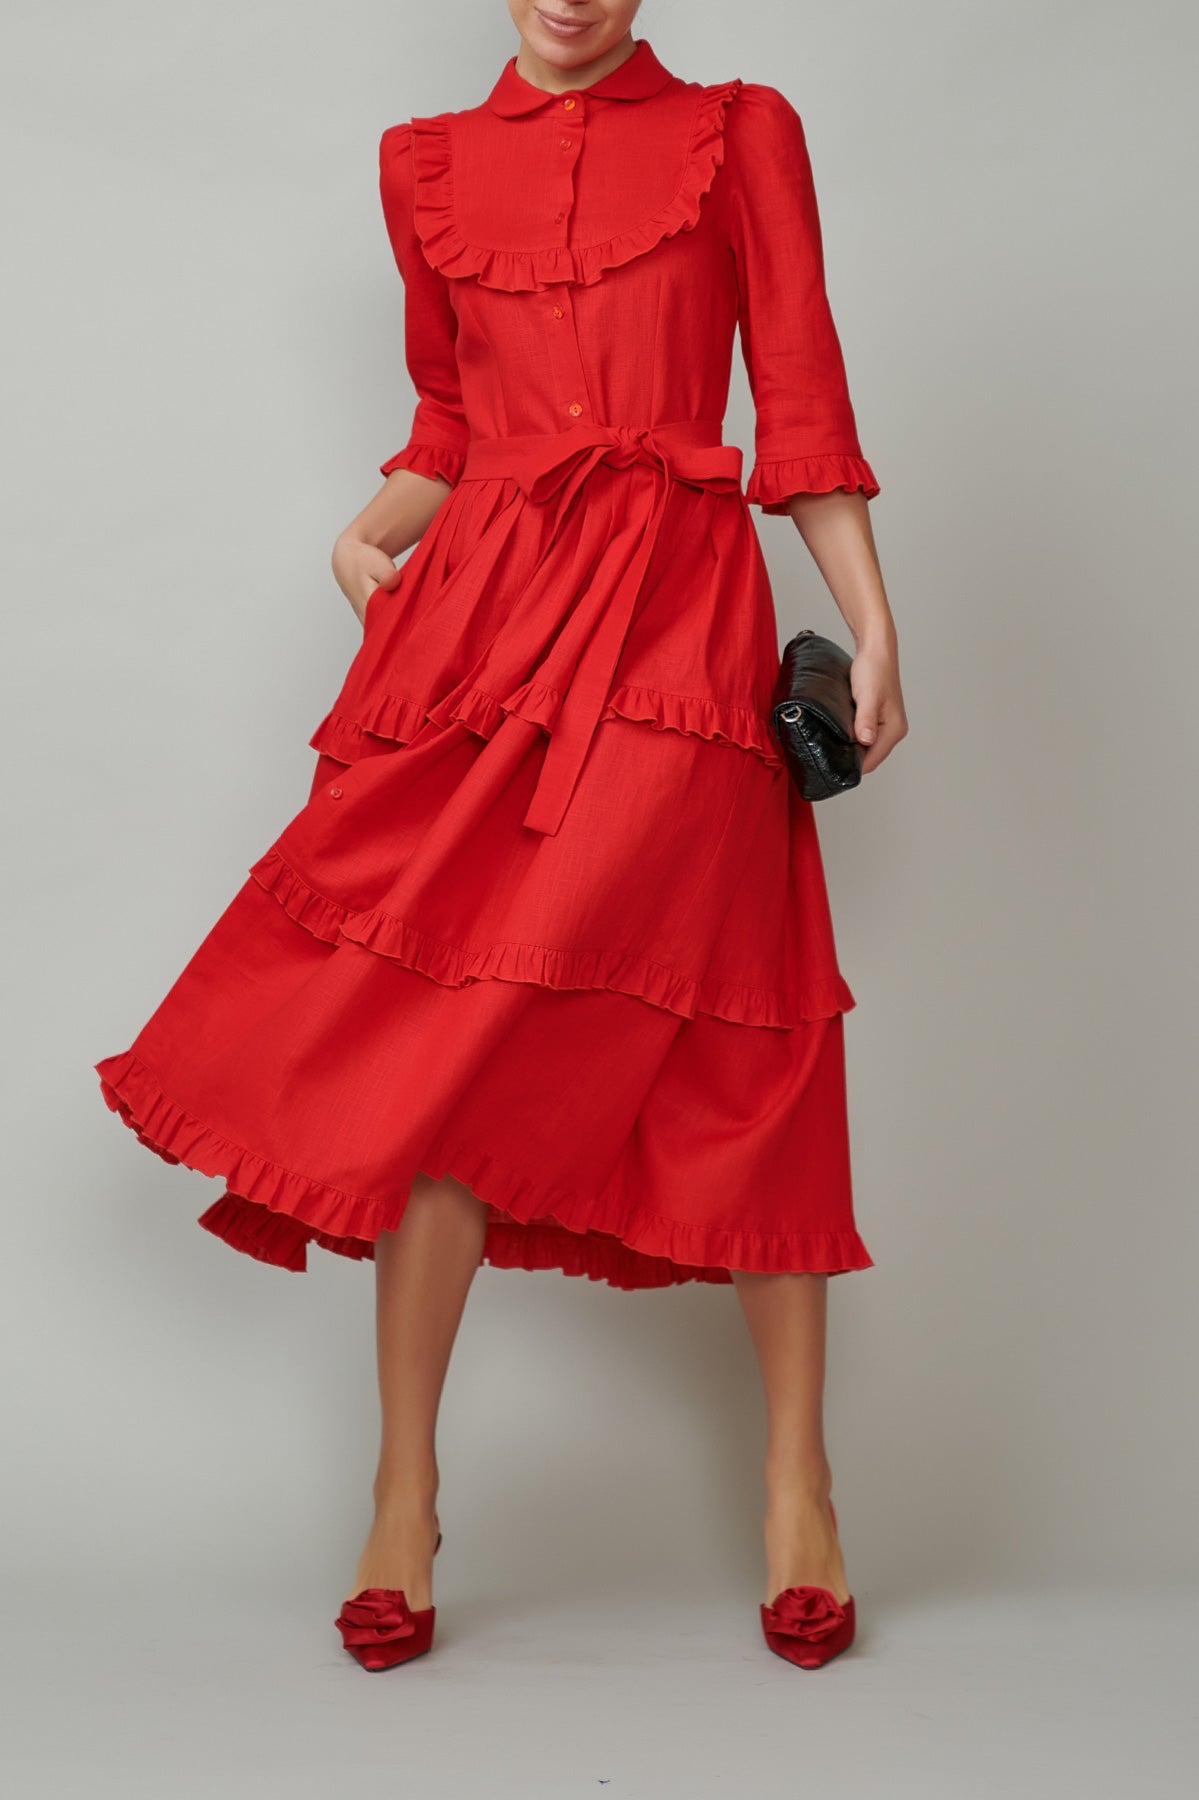 Shirt dress with round placket and frills, made of red linen